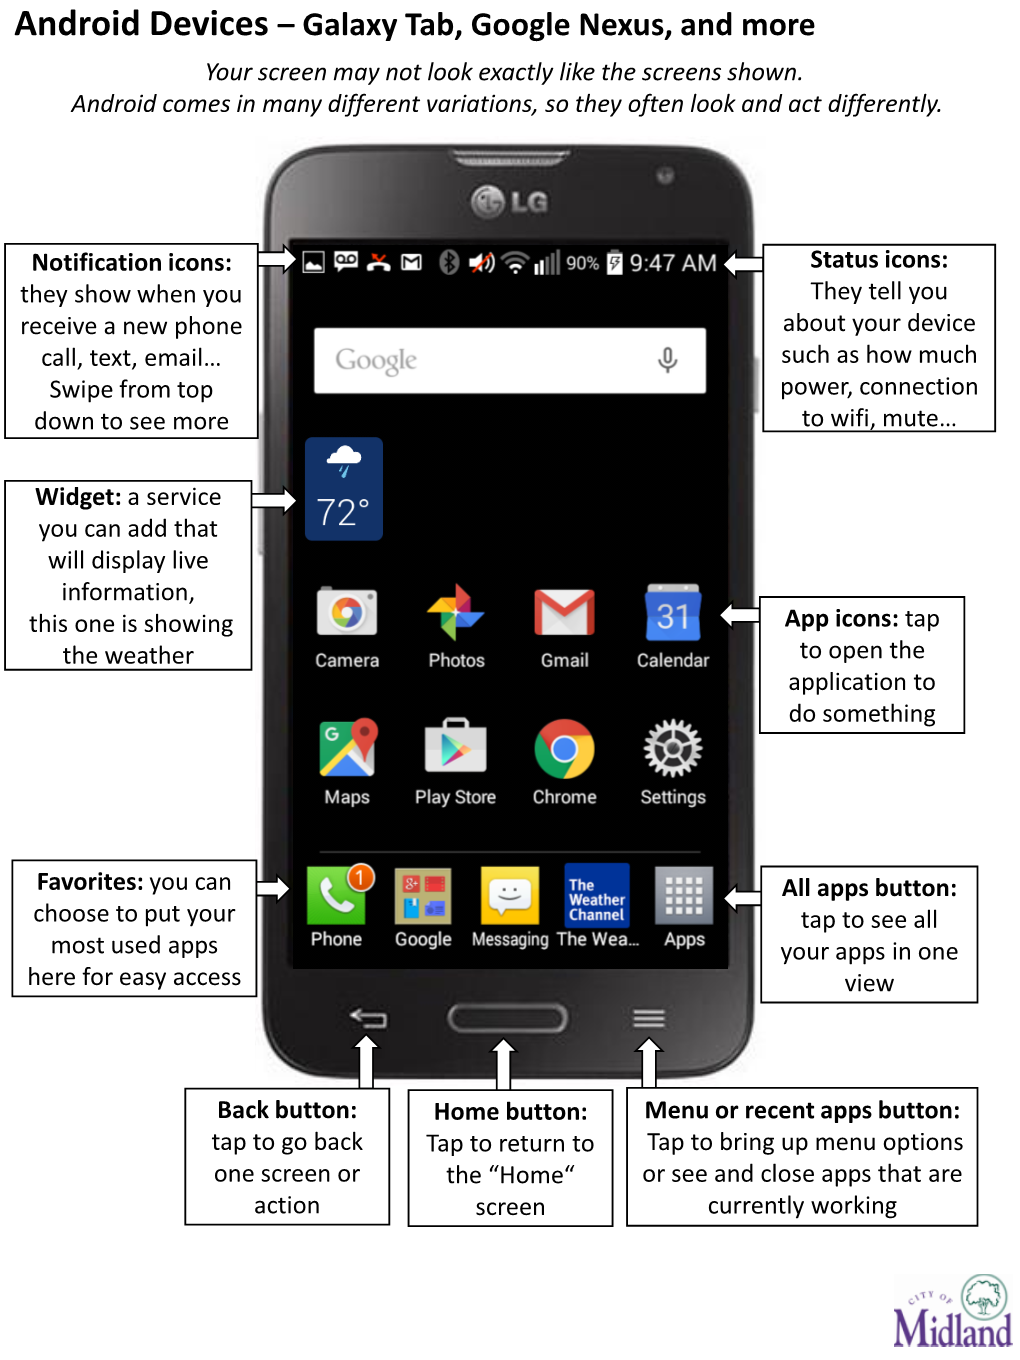 Android Devices – Galaxy Tab, Google Nexus, and More Your Screen May Not Look Exactly Like the Screens Shown